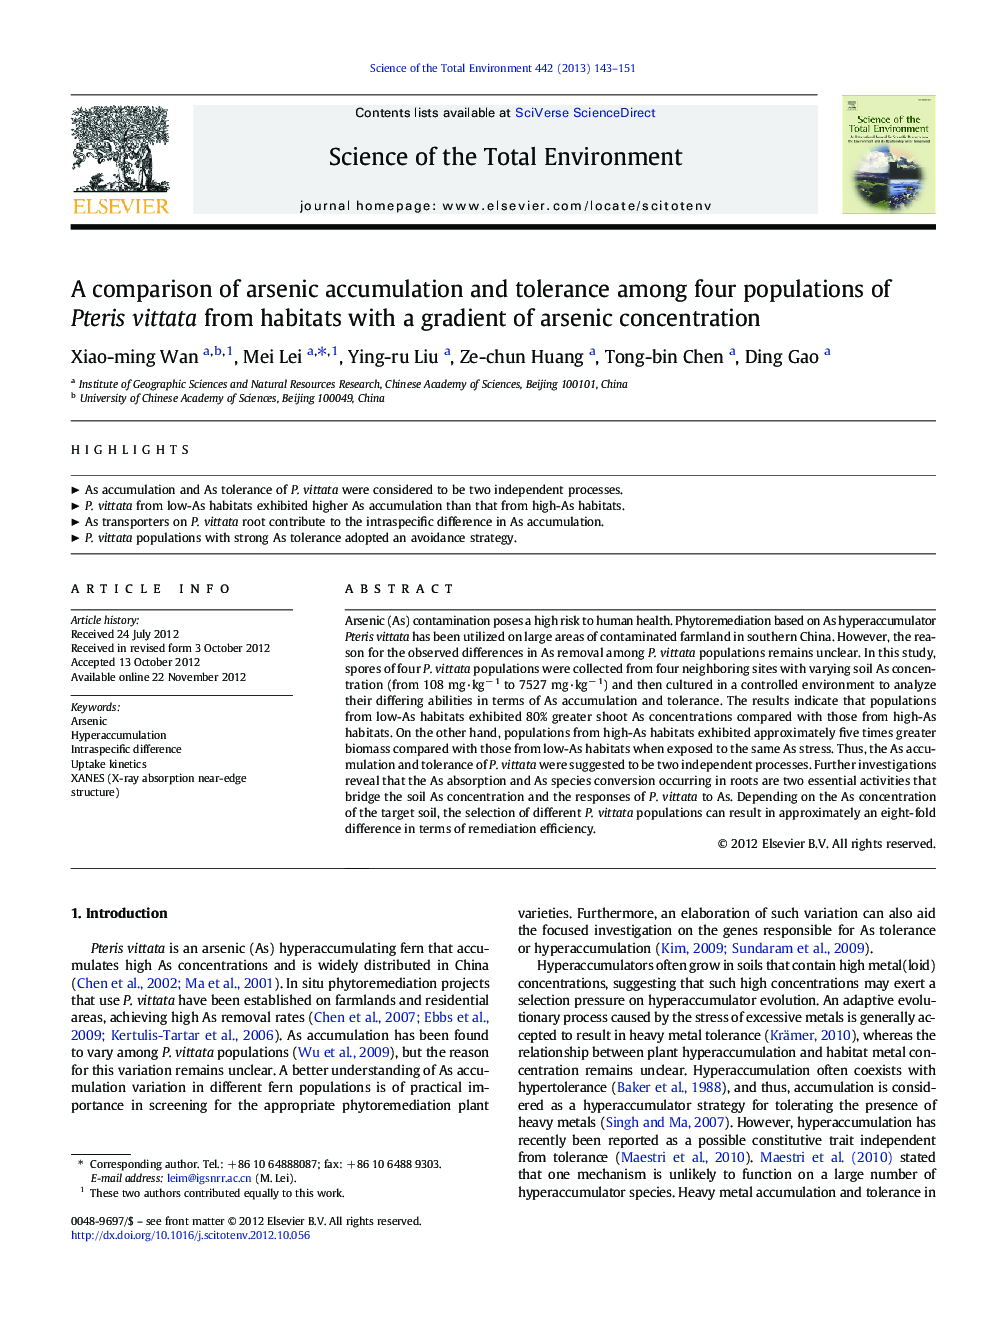 A comparison of arsenic accumulation and tolerance among four populations of Pteris vittata from habitats with a gradient of arsenic concentration